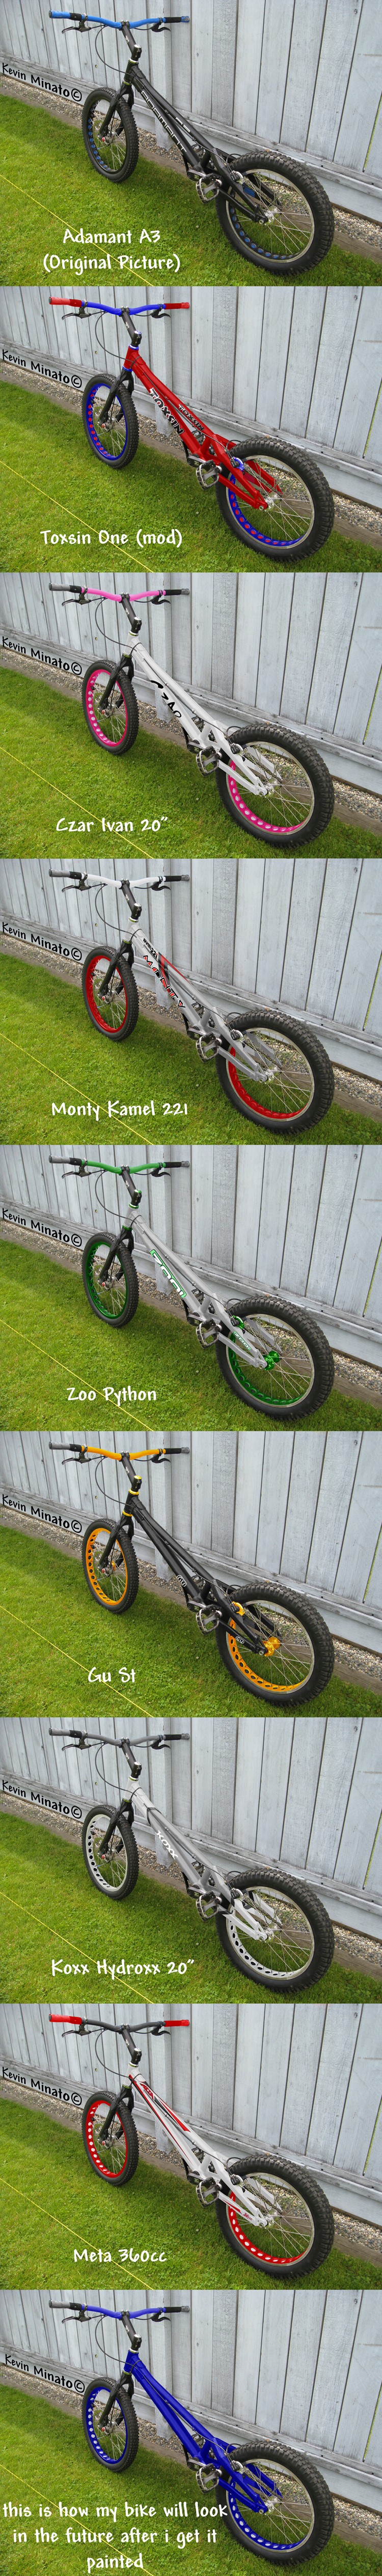 a little project i have been working on. i have changed mt bikes paint and made it into a whole bunch of different bikes